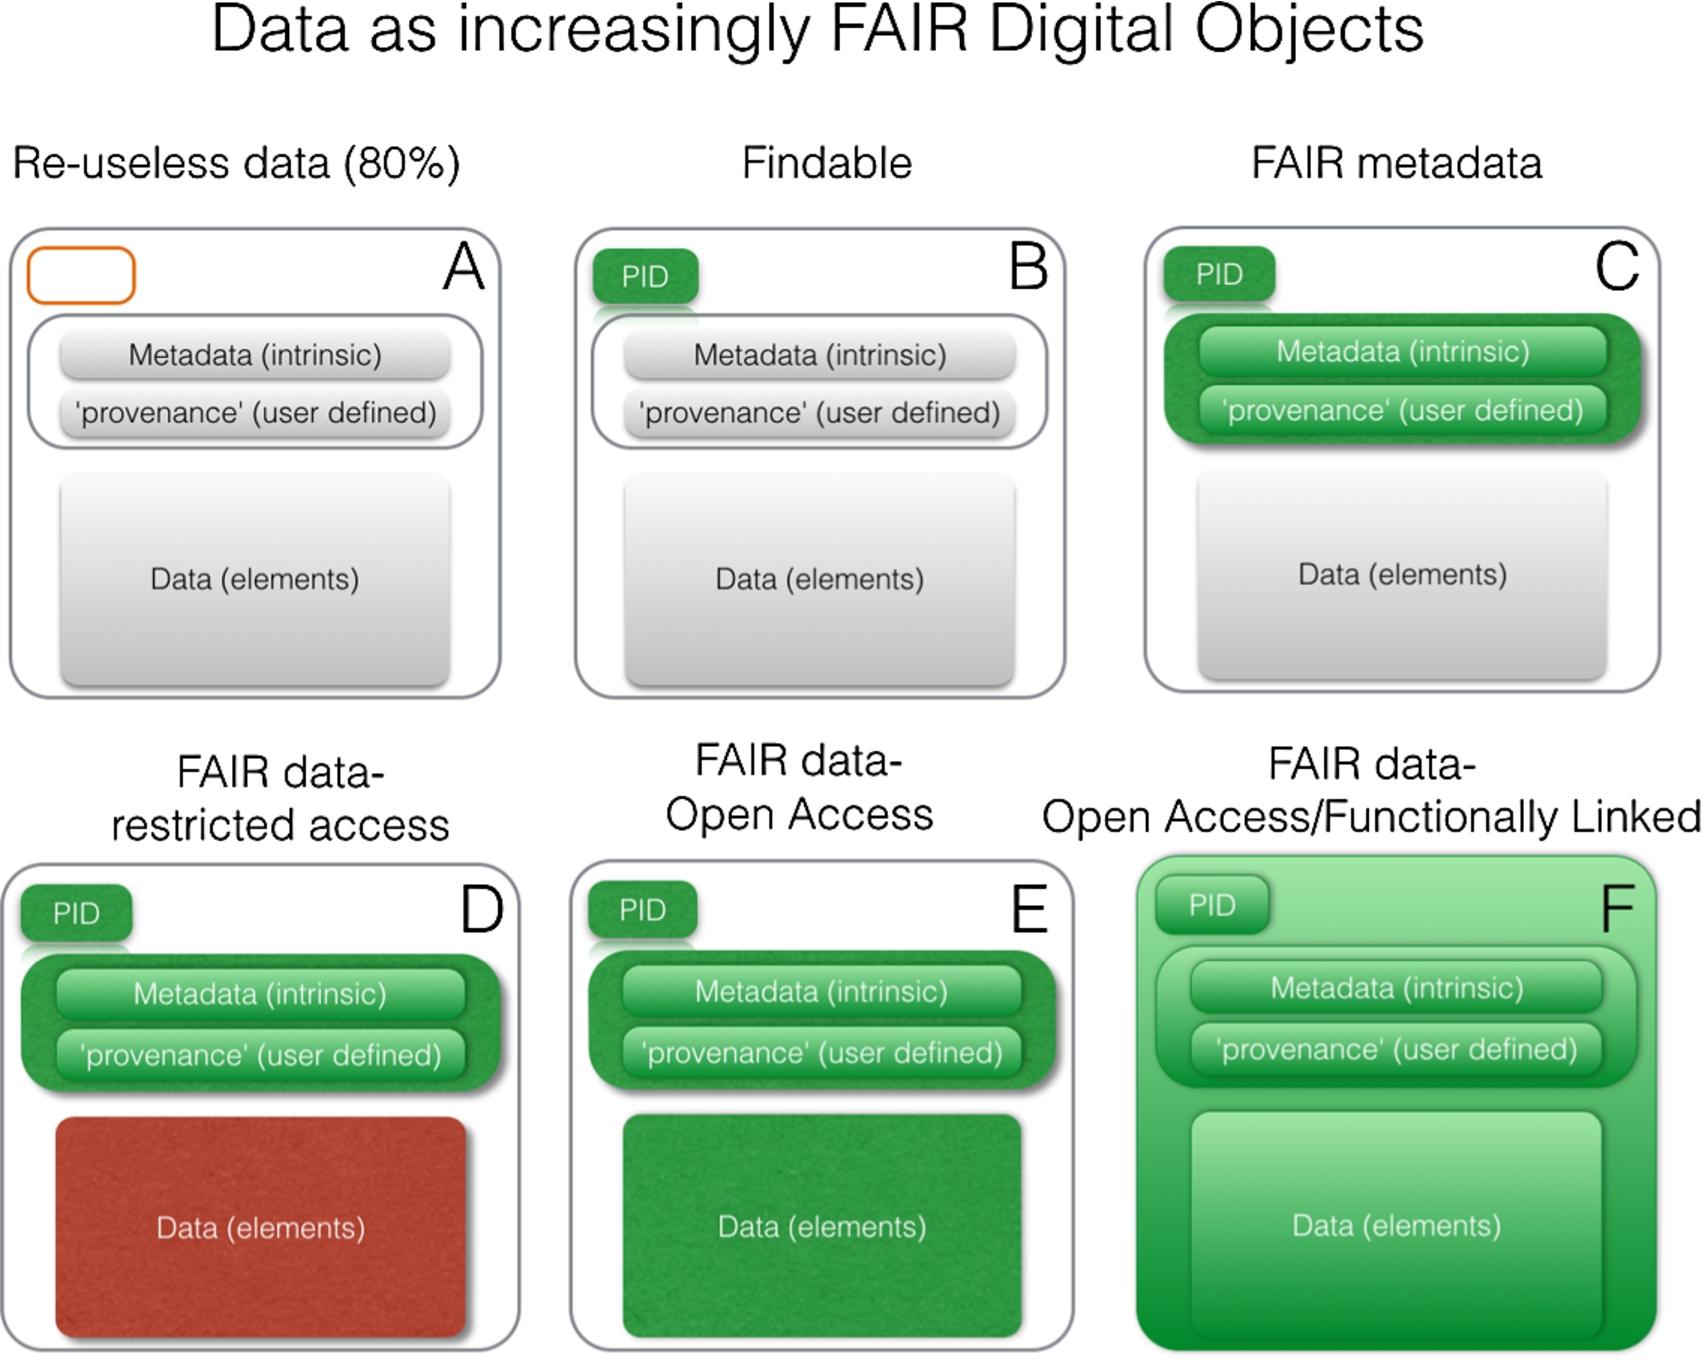 Varying degrees of FAIRness. As elements become coloured, they have become FAIR. For example, adding a persistent identifier (PID) increases the fairness of that component. Coloured elements in green are FAIR and open, coloured elements in red are FAIR and closed. In the final panel, the mechanism for expressing the relationship between the ID, the metadata, and the data, is also FAIR (i.e. follows a widely accepted and machine-readable standard, such as DCAT or NanoPublications) and interlinked with other related FAIR data or analytical tools on the Internet of FAIR Data and Services.